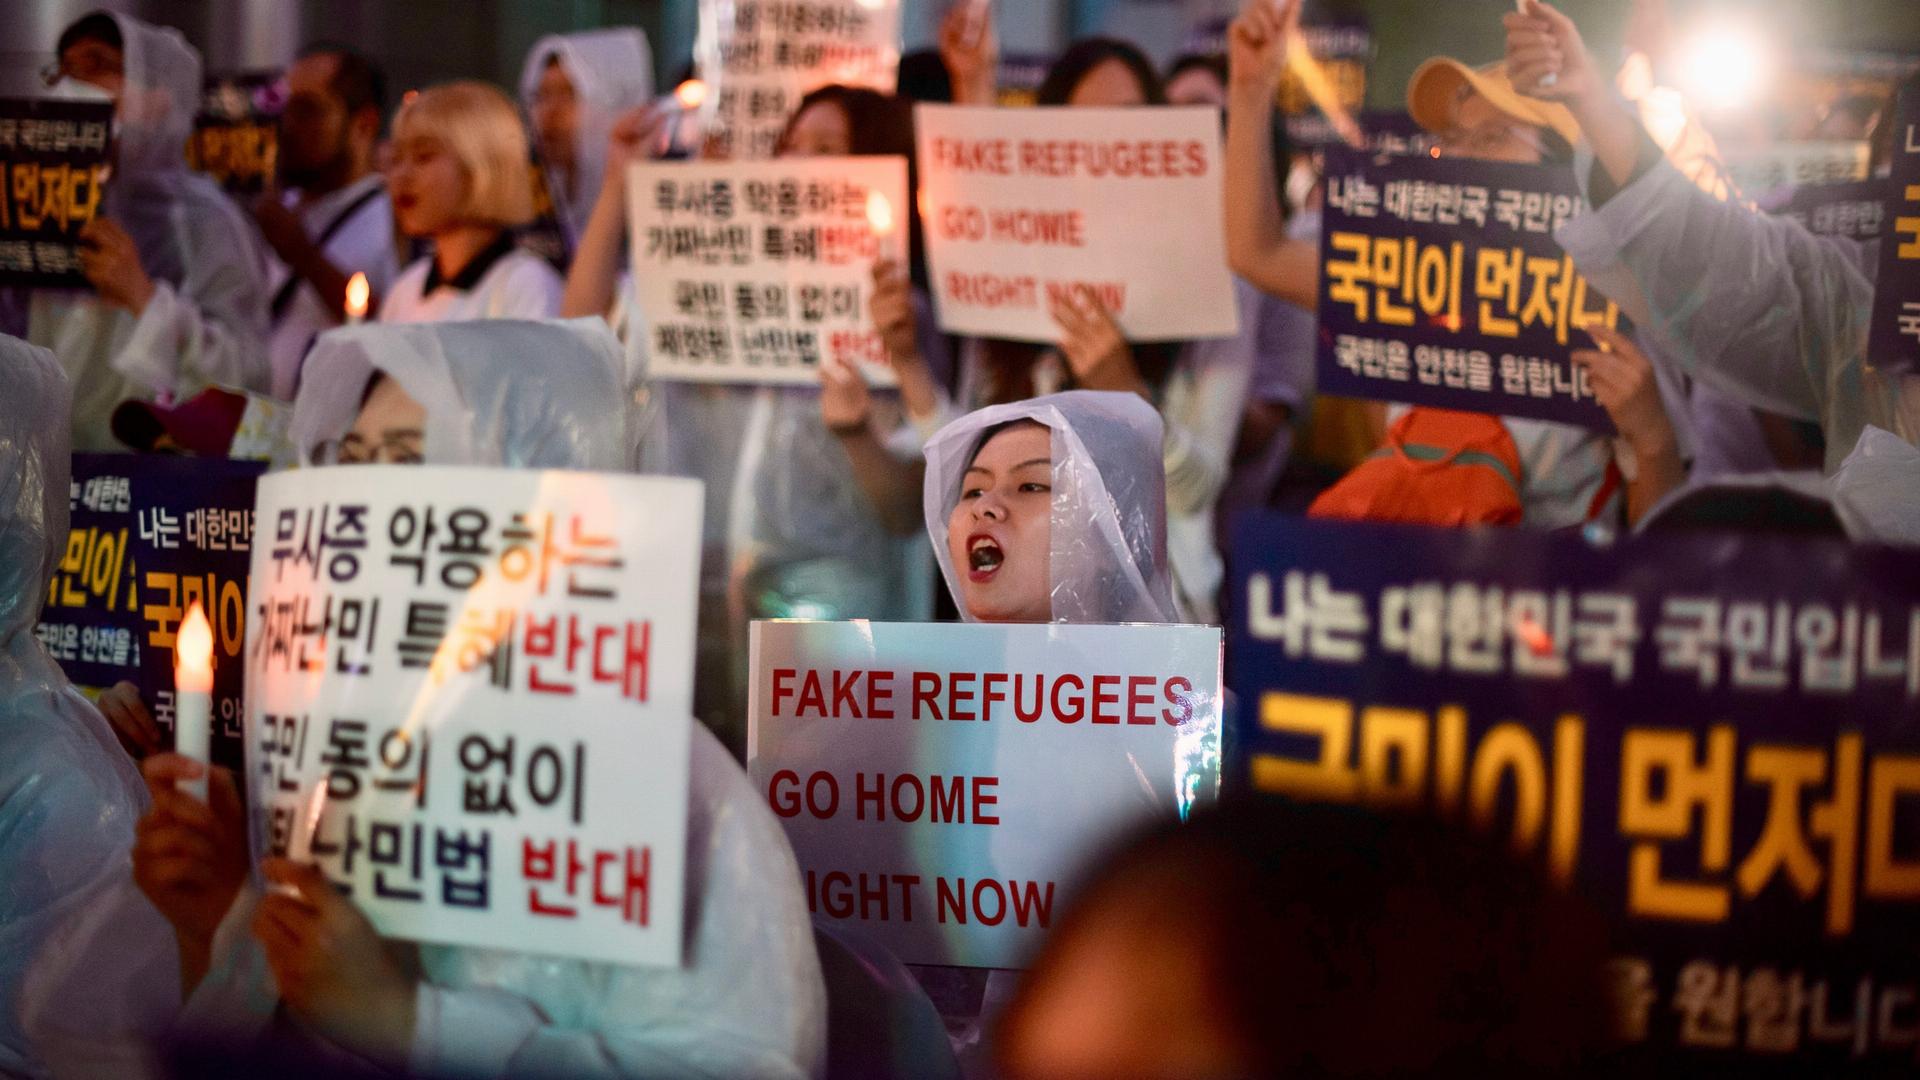 Anti-immigration activists attend a protest in the South Korean capital of Seoul on June 30, 2018. They were protesting against a group of hundreds of Yemeni asylum-seekers who arrived on the South Korean tourist resort of Jeju Island in recent months. Th